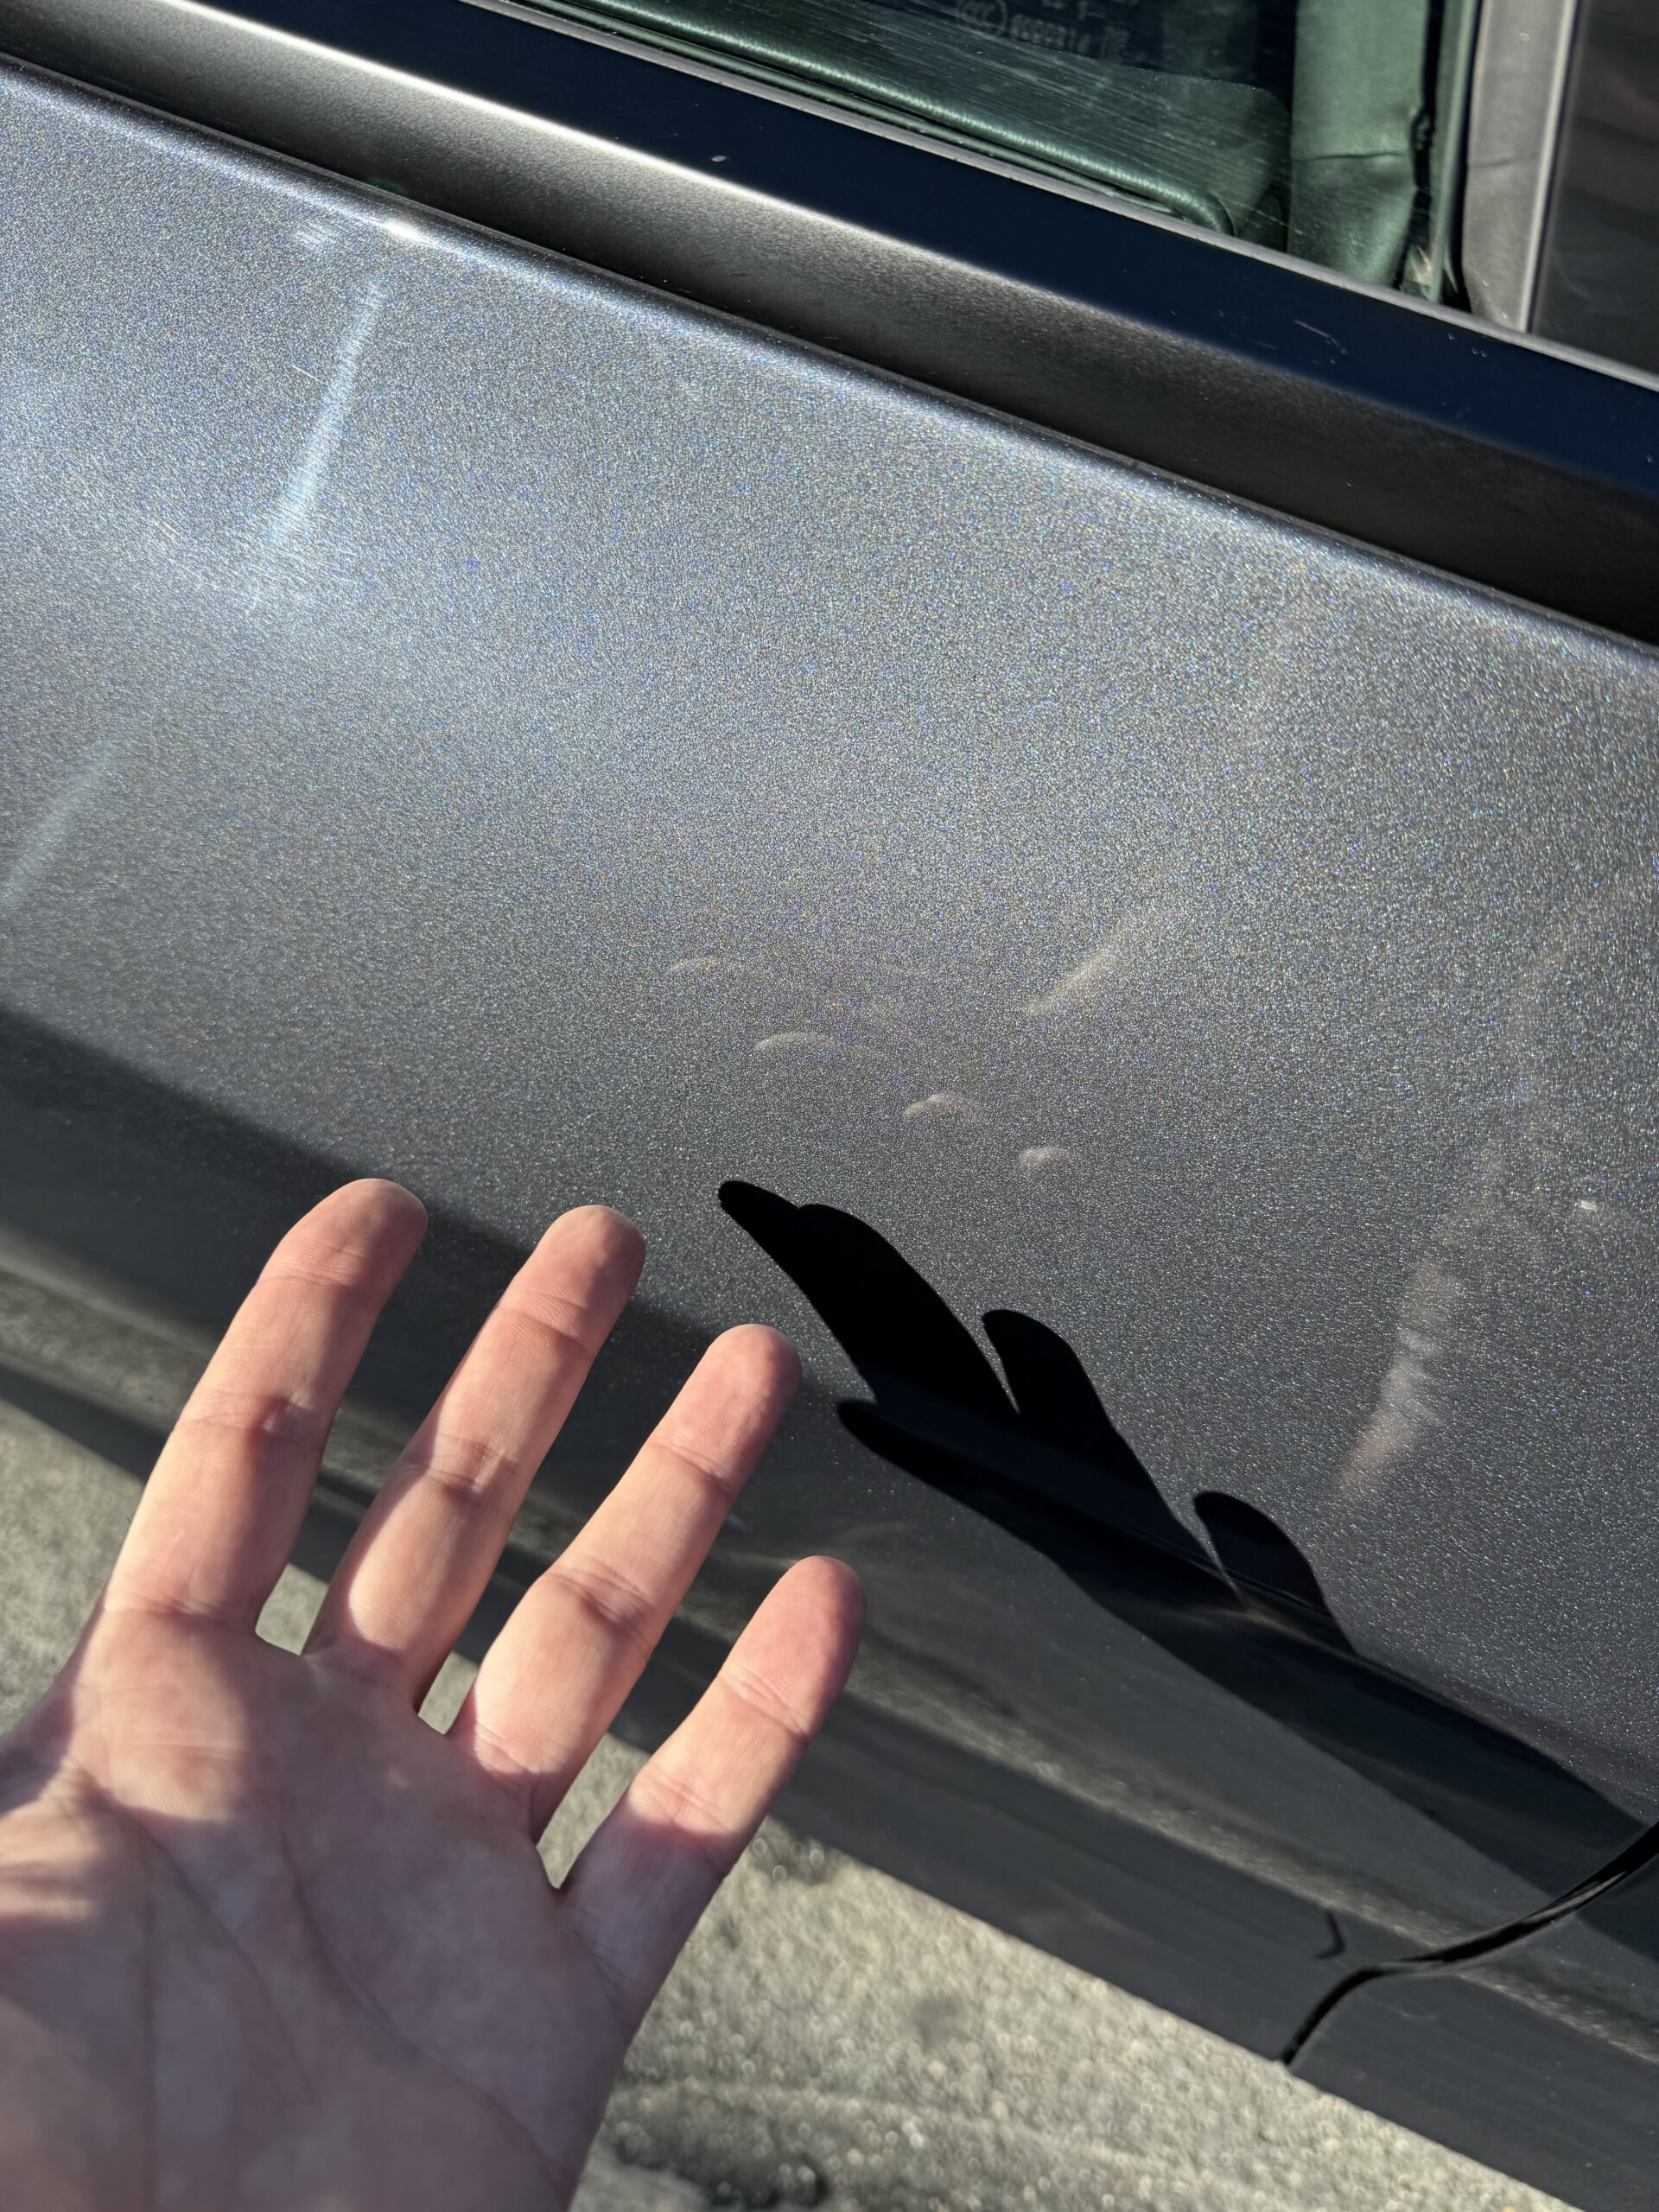 Some skillful wet sanding and this scratch is completely gone.